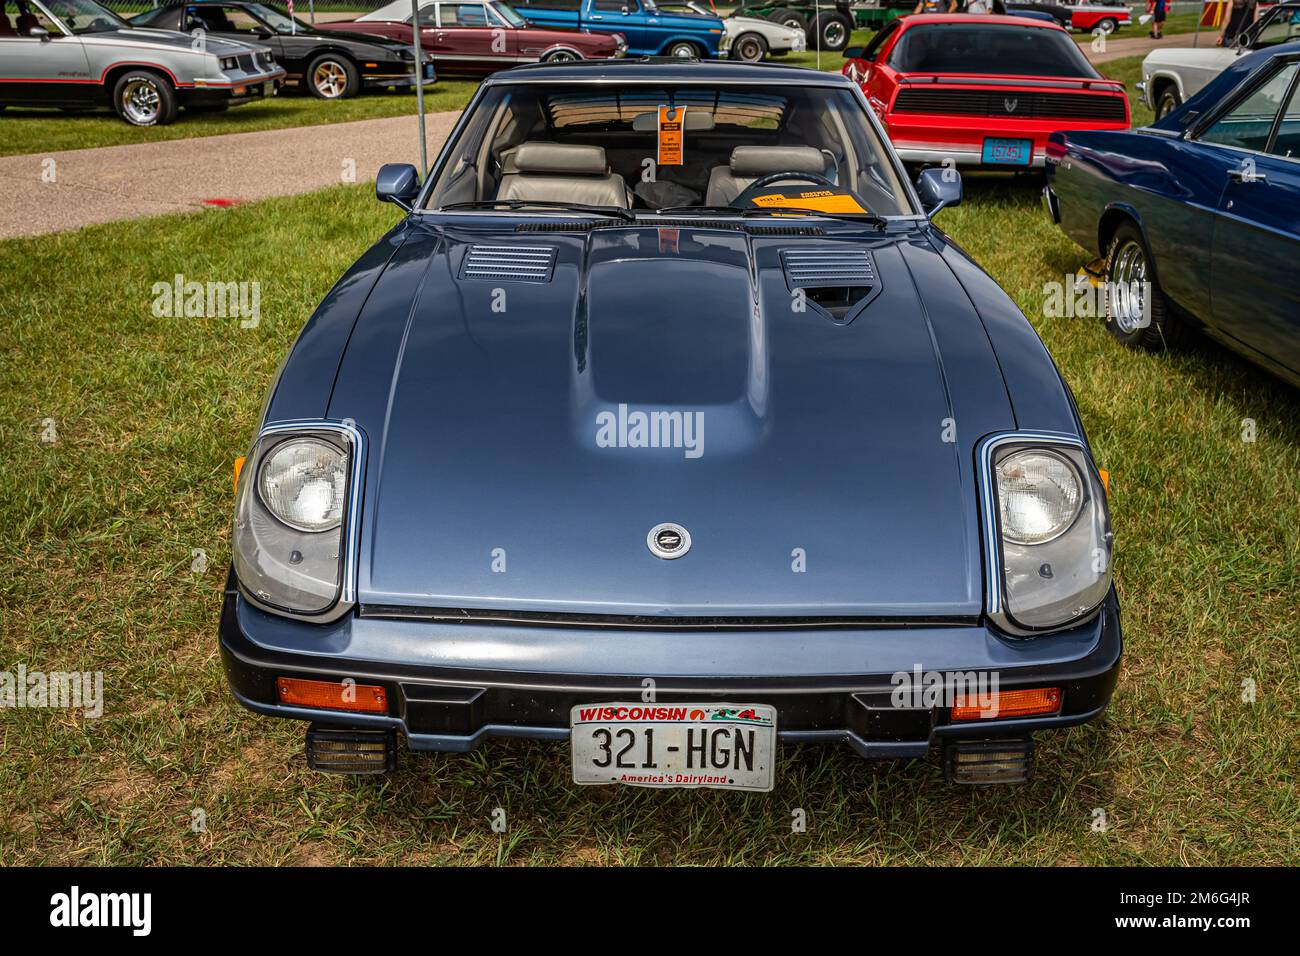 Iola, WI - July 07, 2022: High perspective front view of a 1983 Datsun 280ZX Turbo at a local car show. Stock Photo